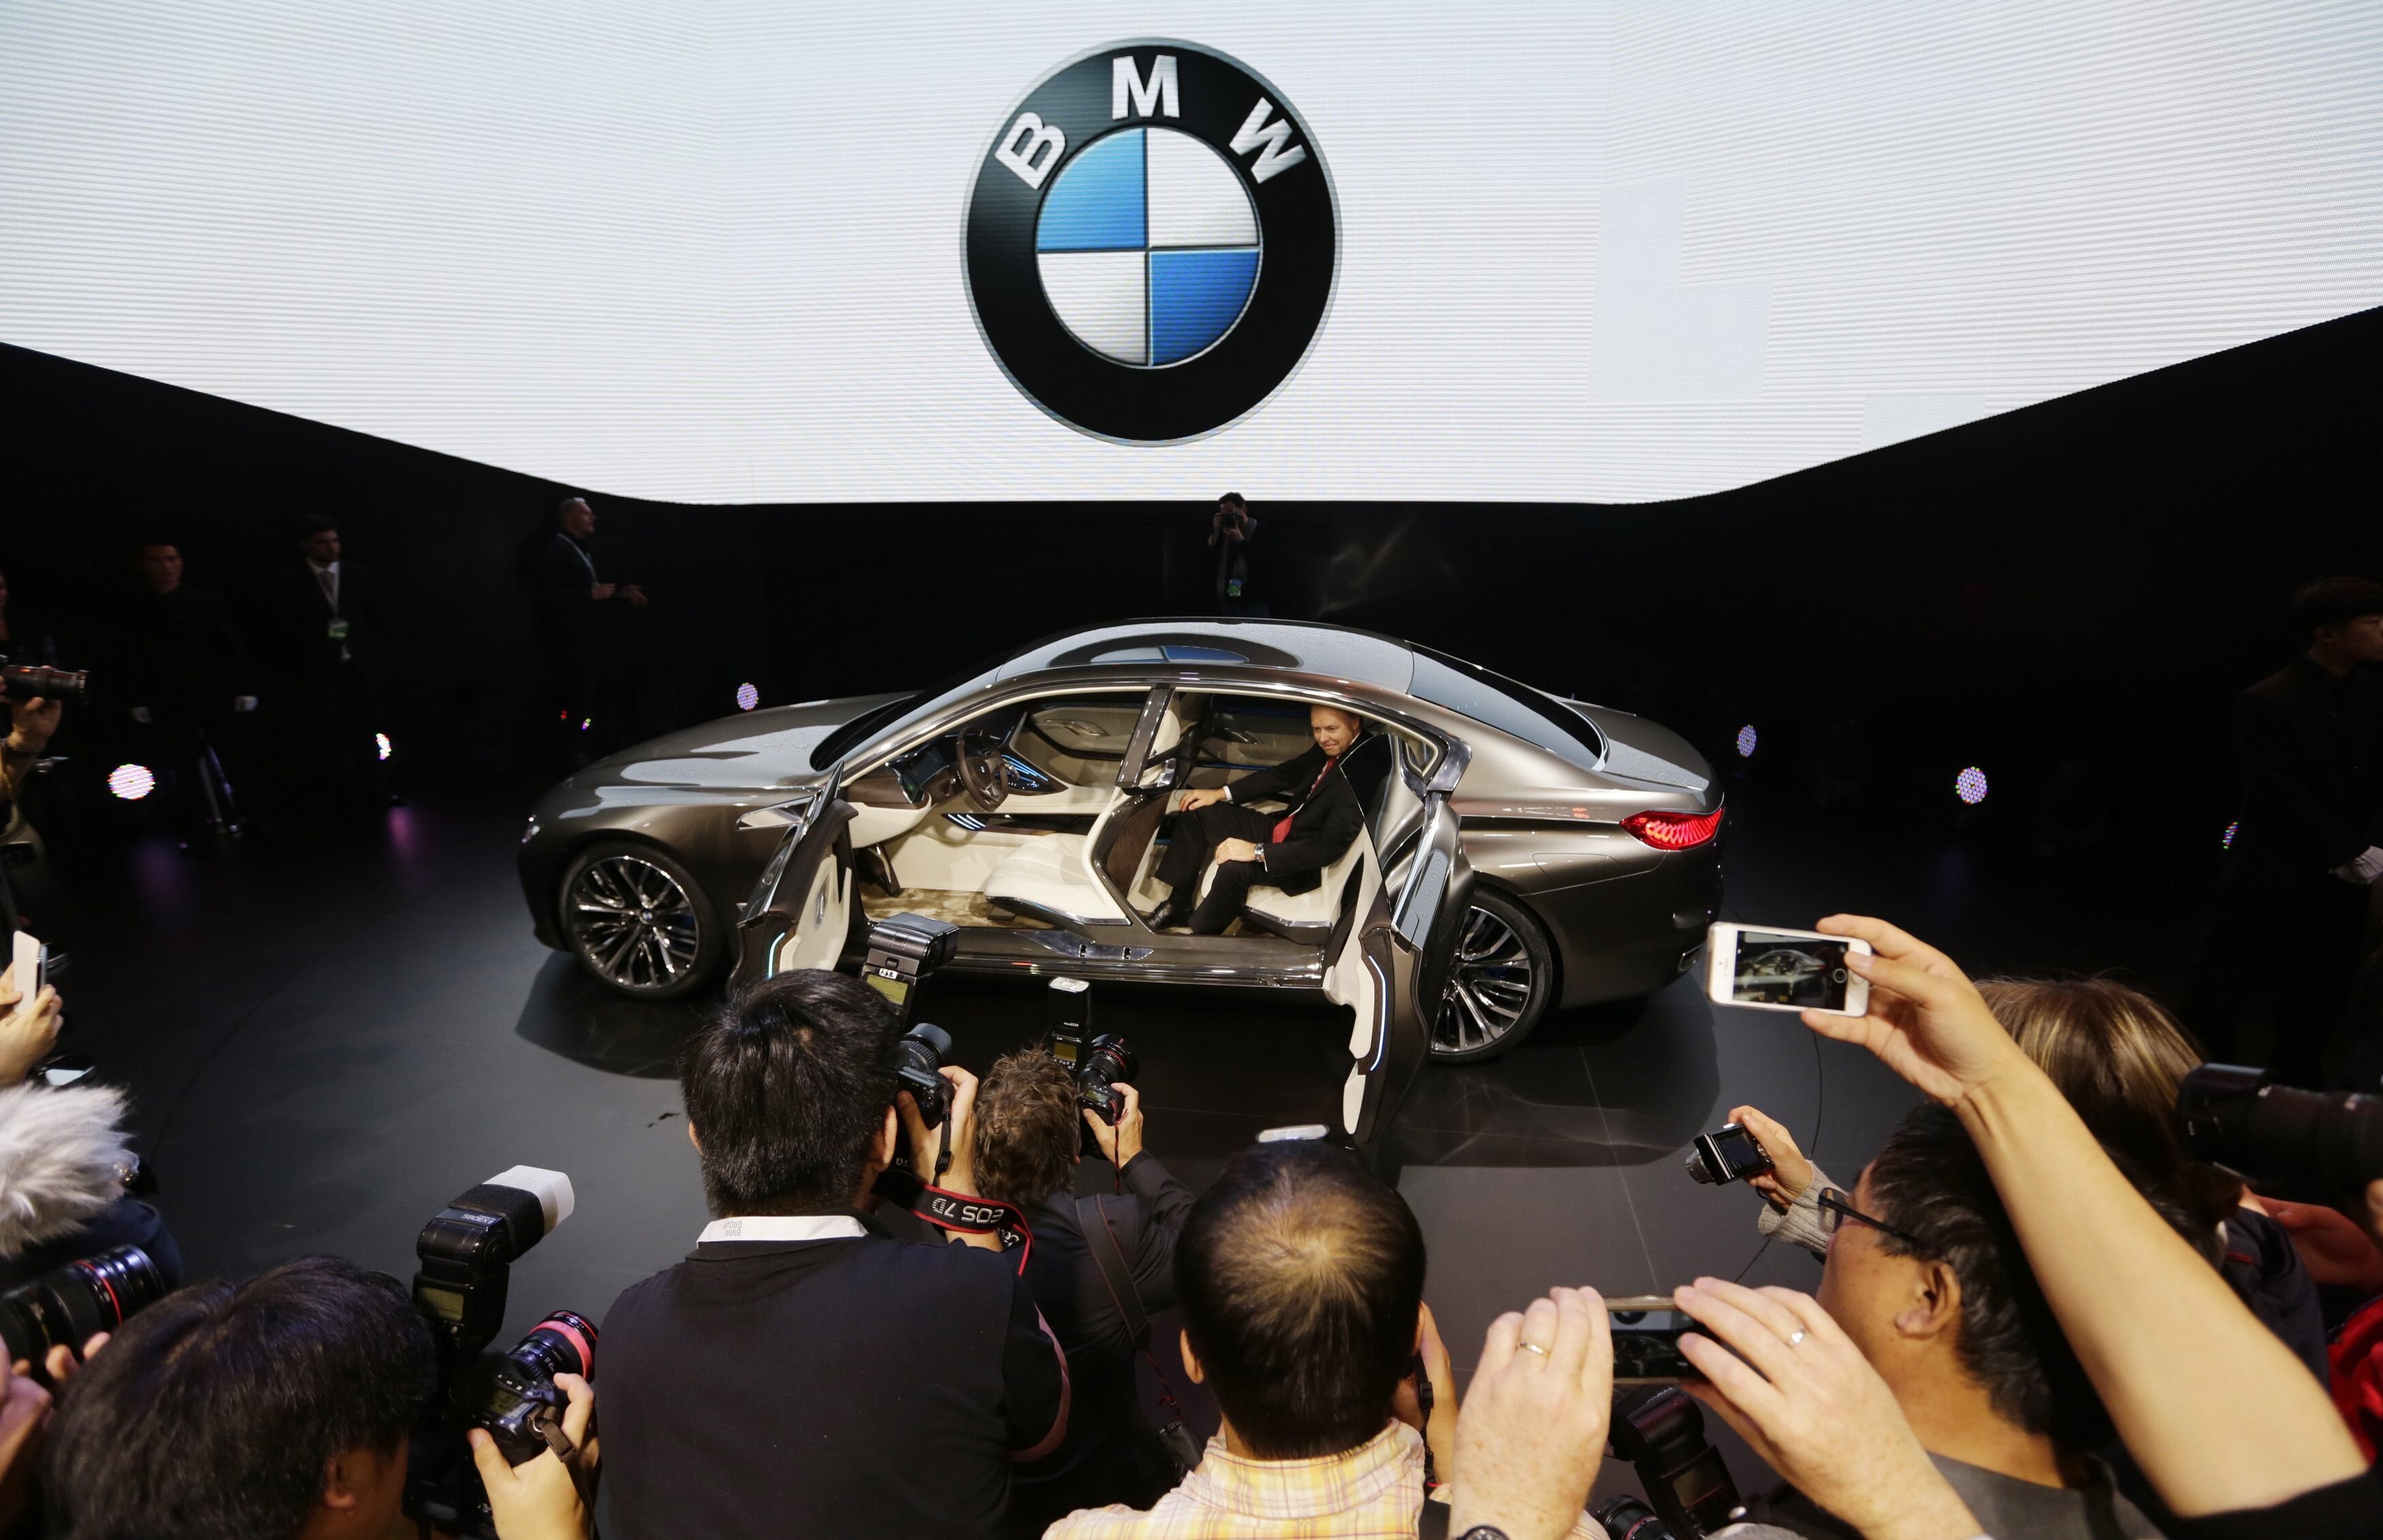 A BMW Vision Future Luxury concept car displayed during its world premiere at Auto China 2014. Photo: Reuters/Jason Lee